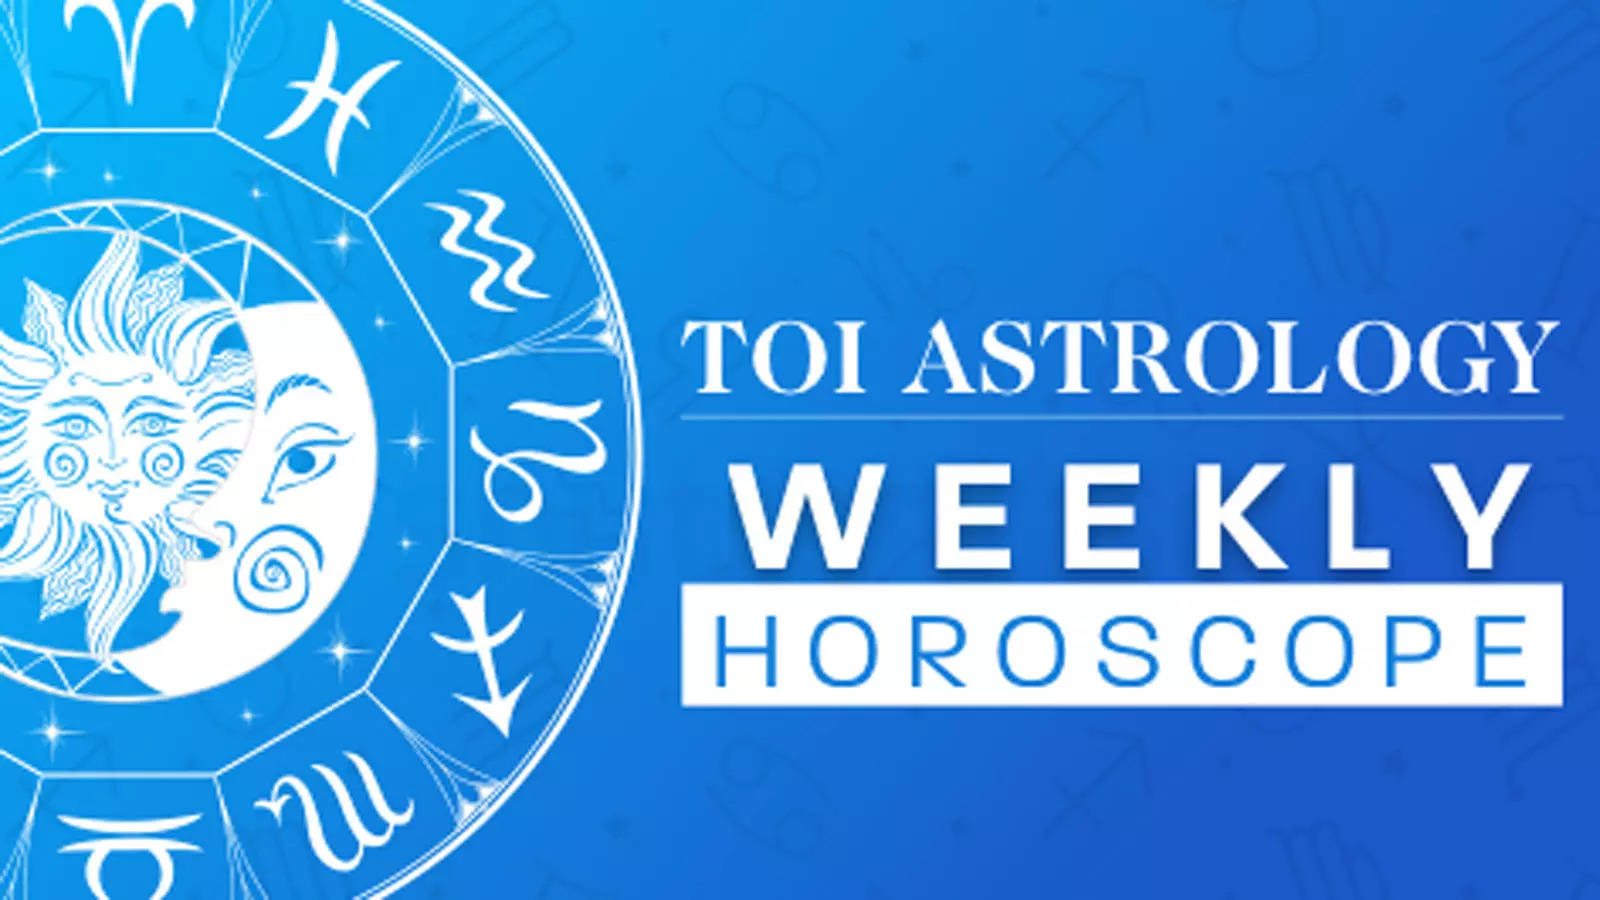 Weekly Horoscope, February 12 to 18, 2023: Read this week's astrological predictions for Aries, Taurus, Gemini, Cancer and others